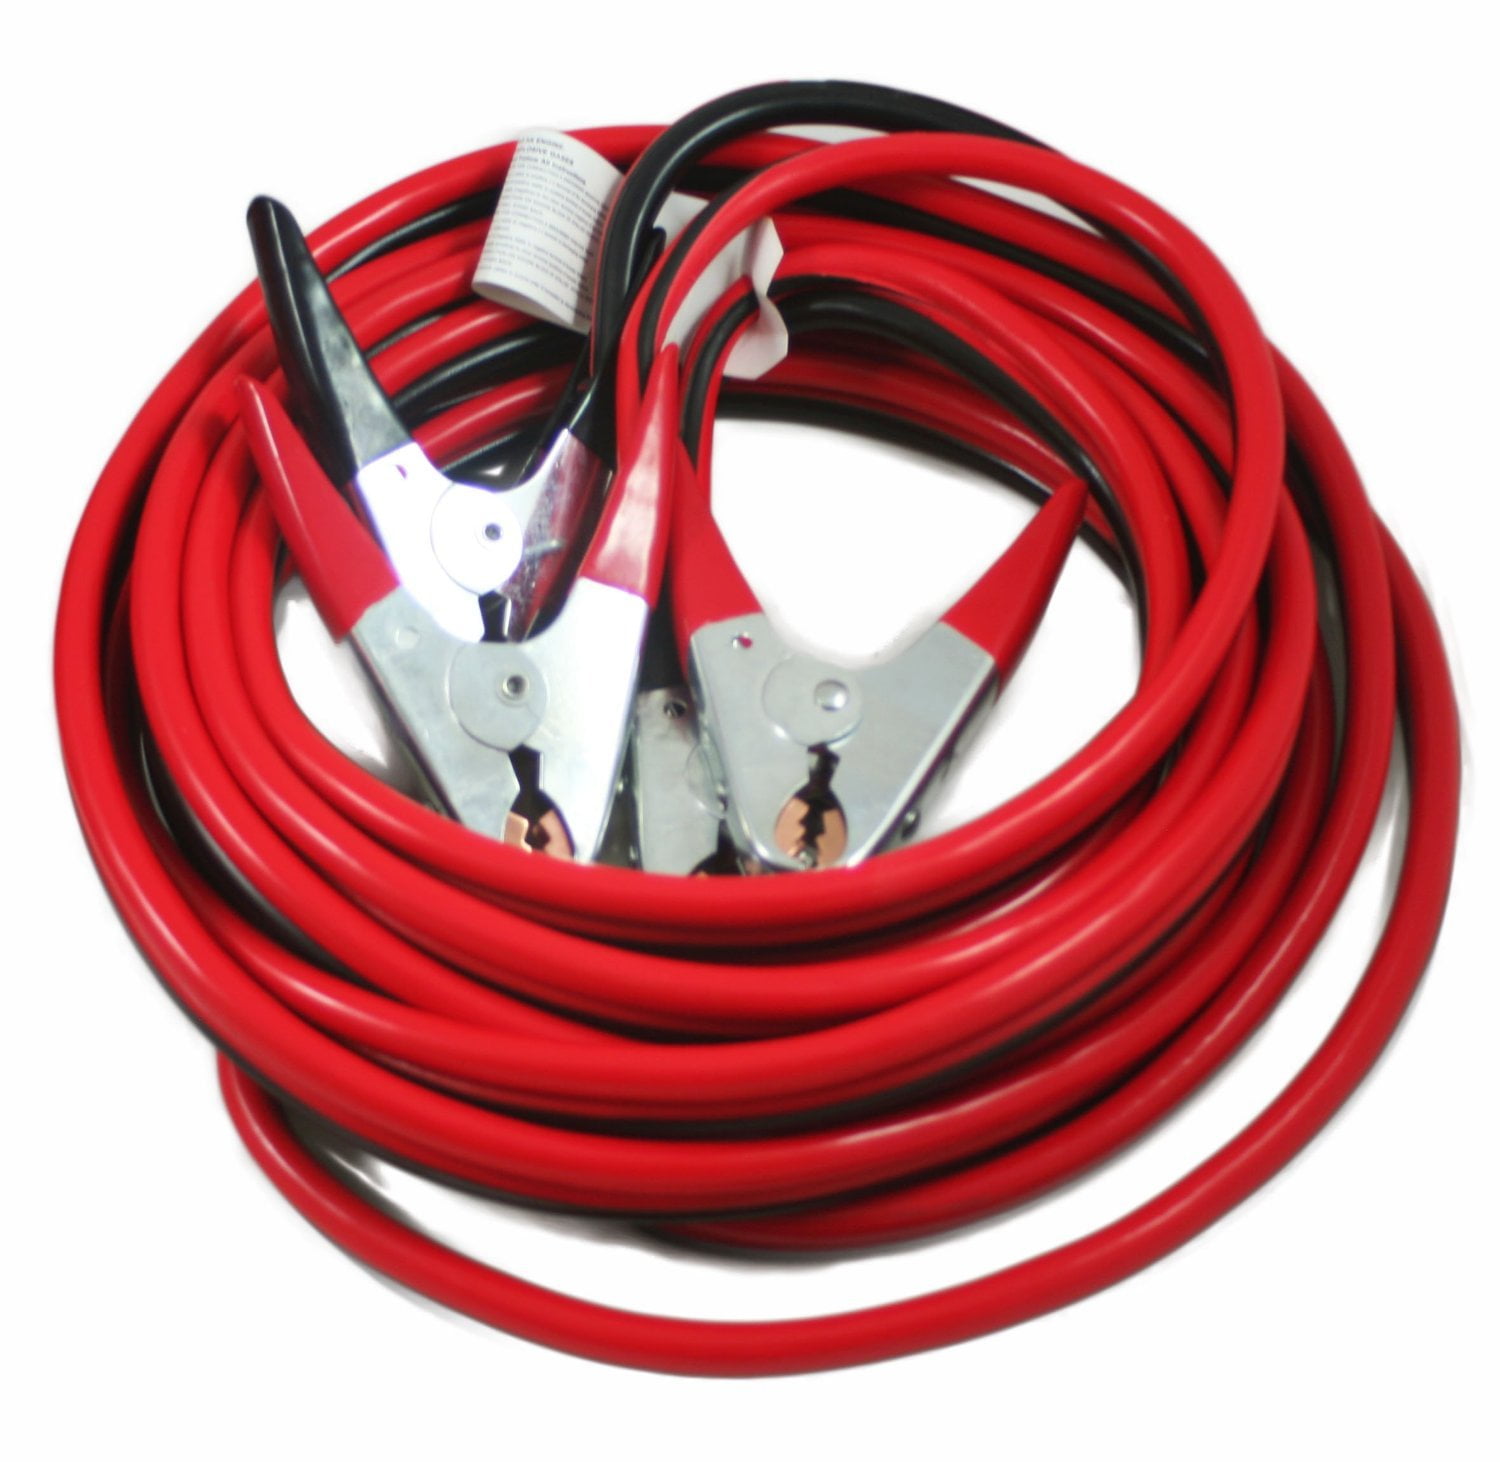 600Amp 2 Gauge Booster Cables 10 FT Power Start Jumper Heavy Duty Car Emergency 